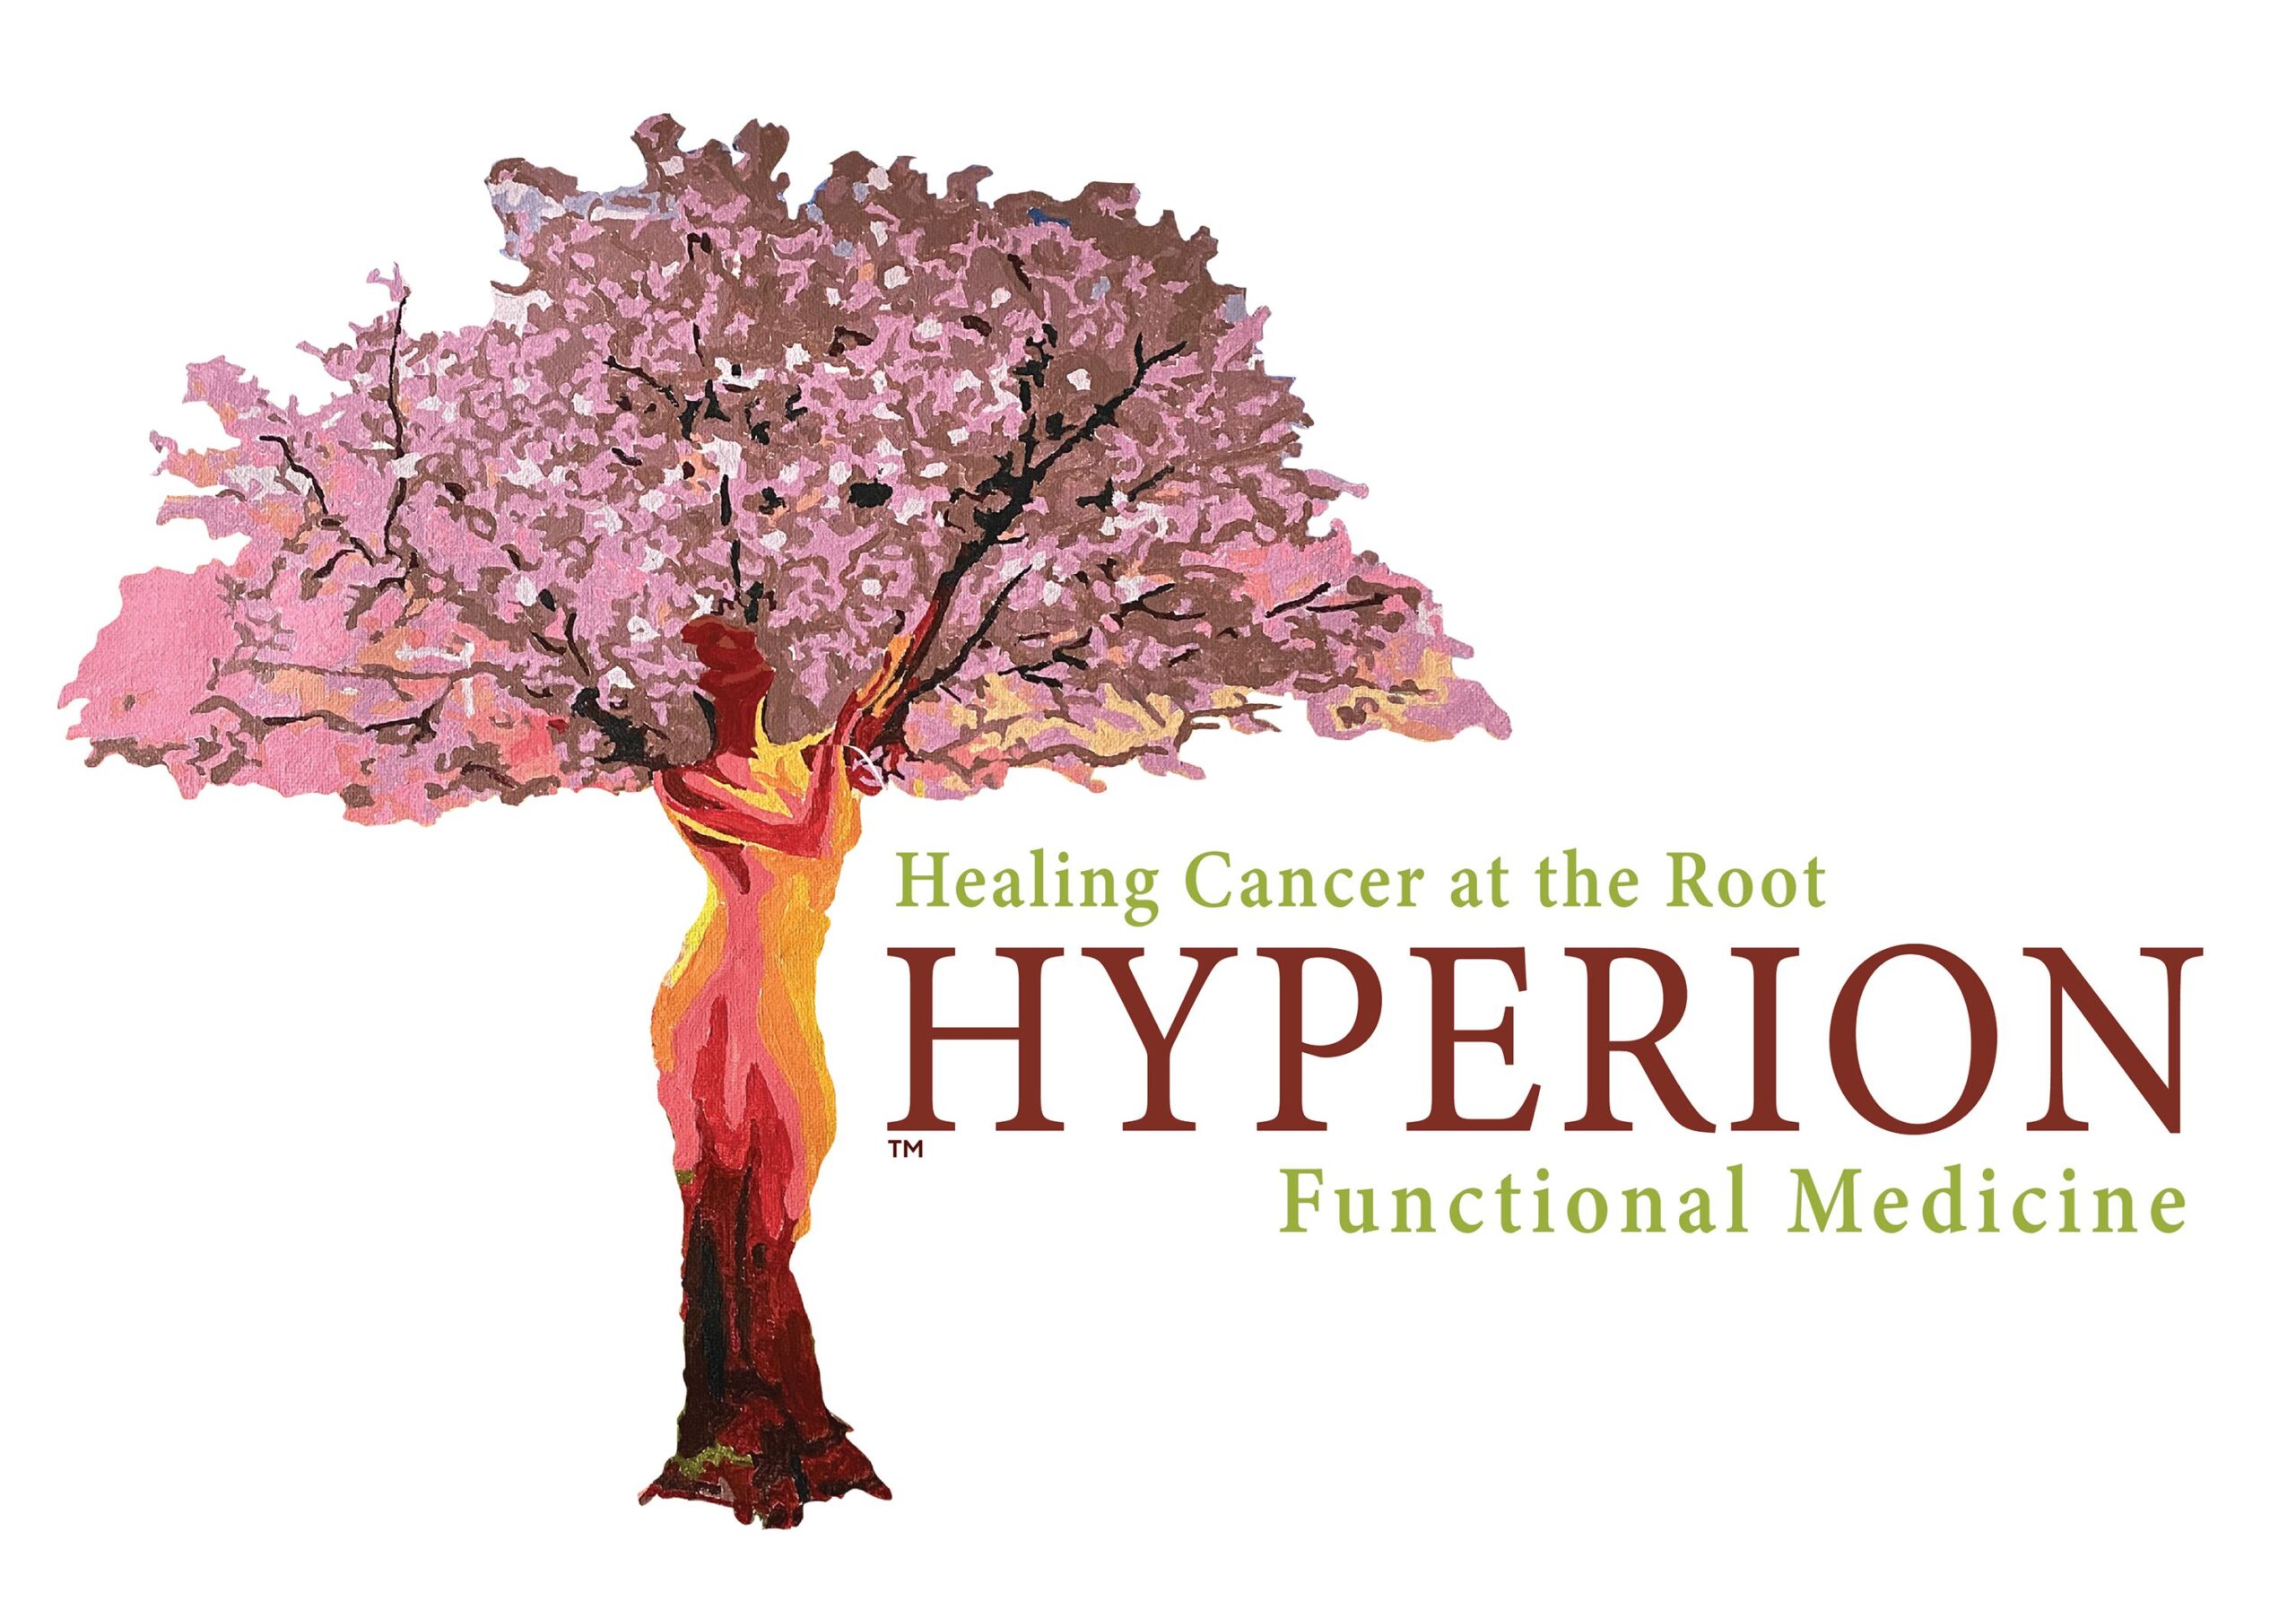 Hyperion Functional Medicine